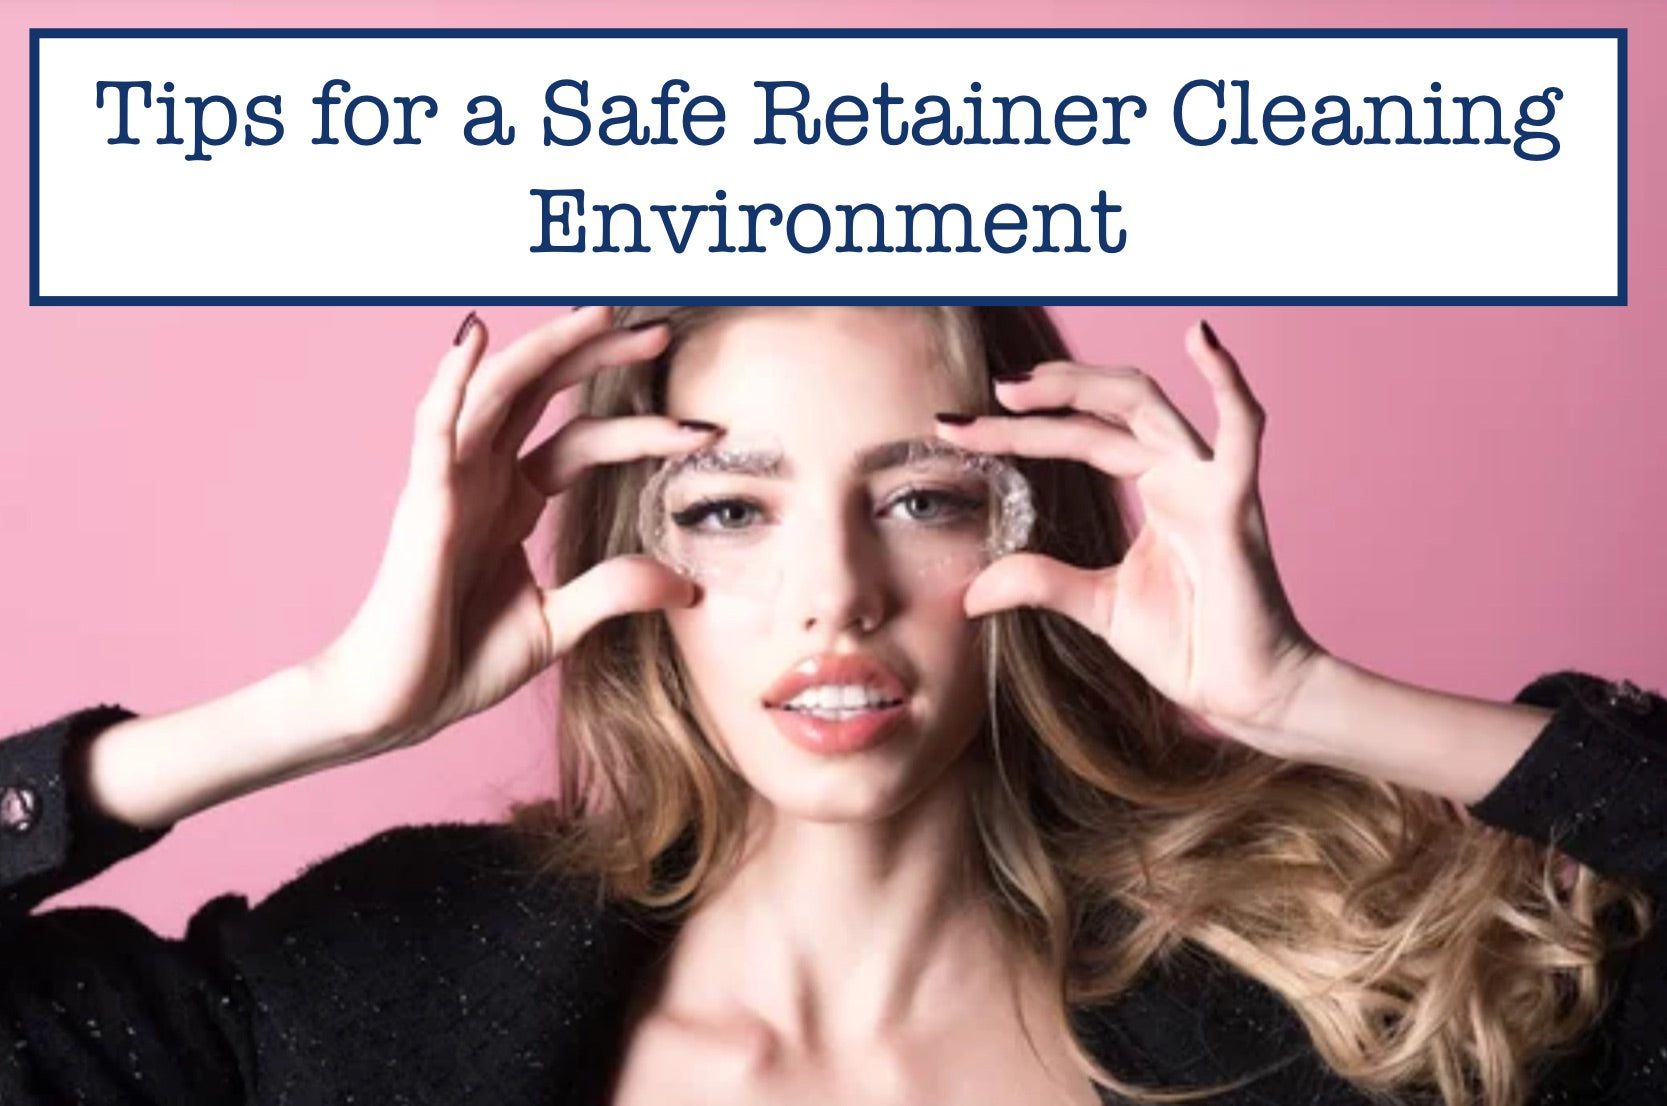 Tips for a Safe Retainer Cleaning Environment